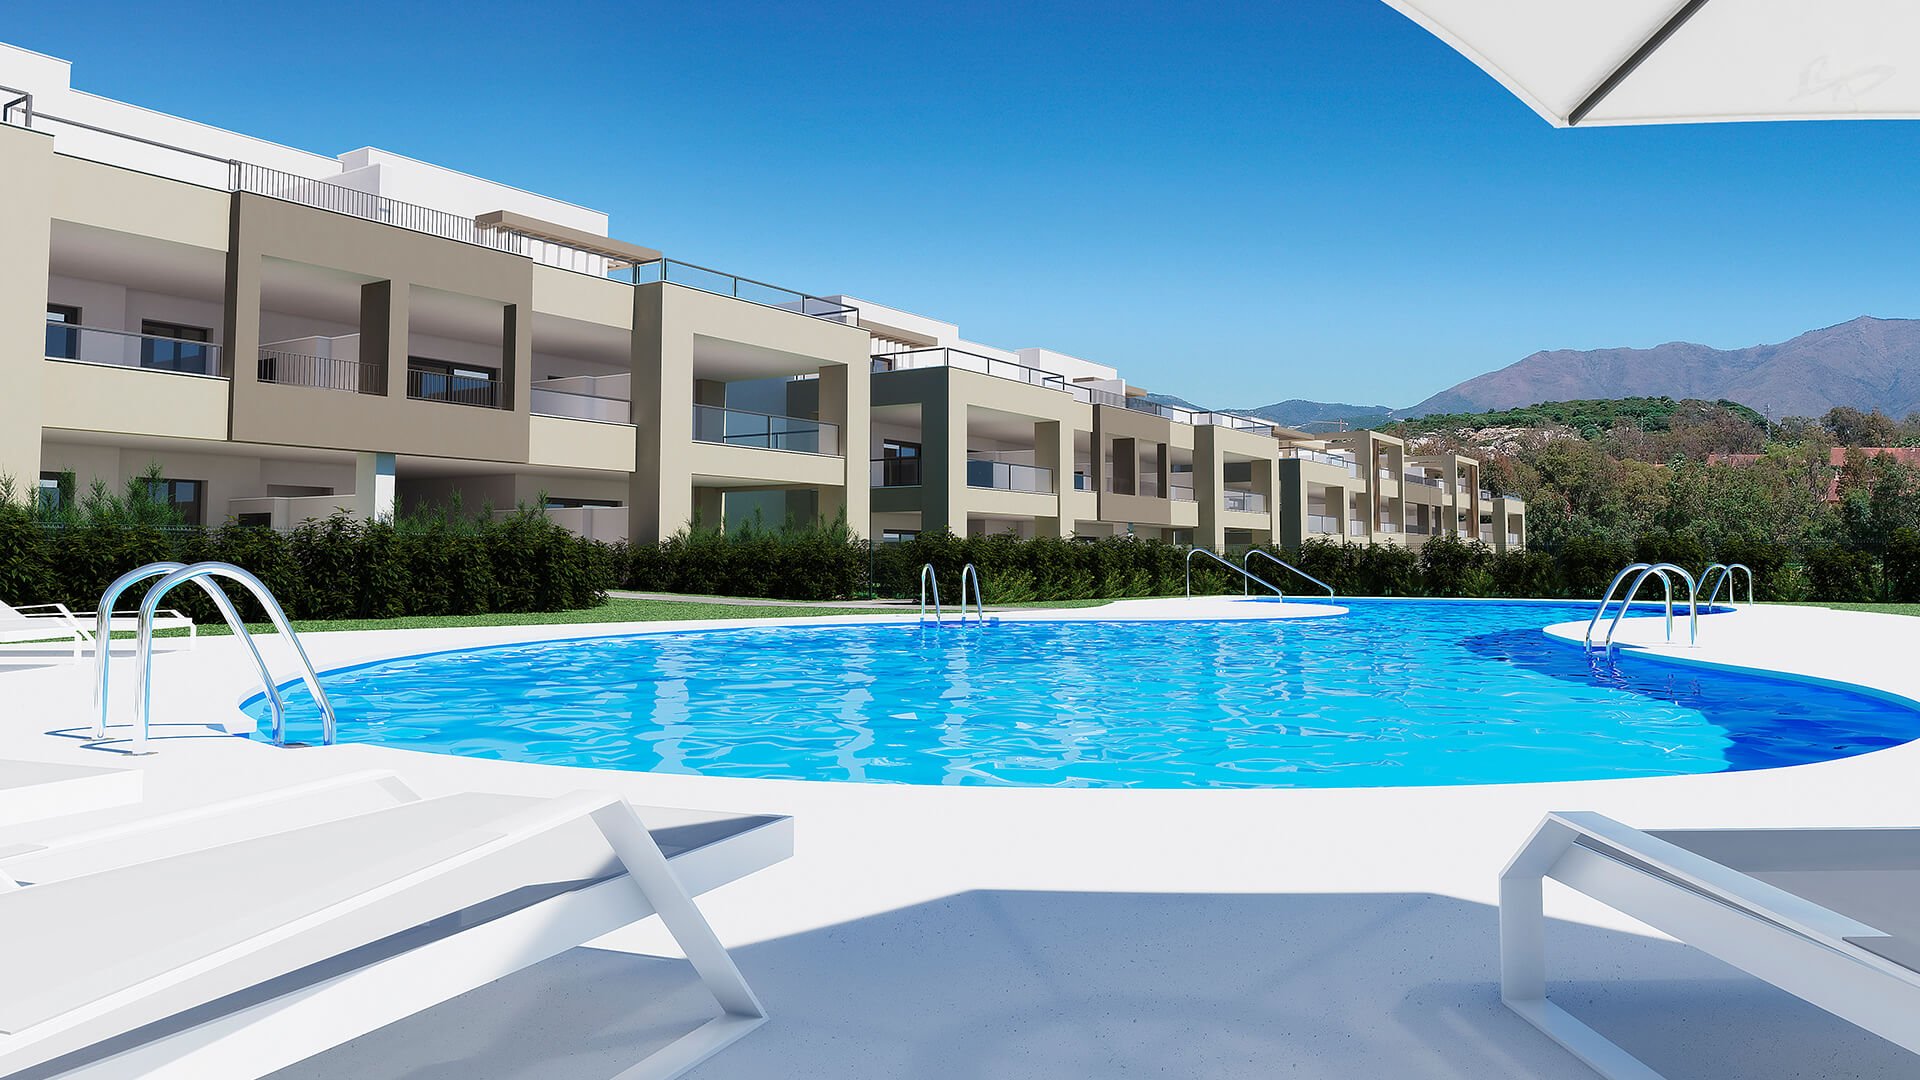 Solemar - New Homes For Sale in Casares